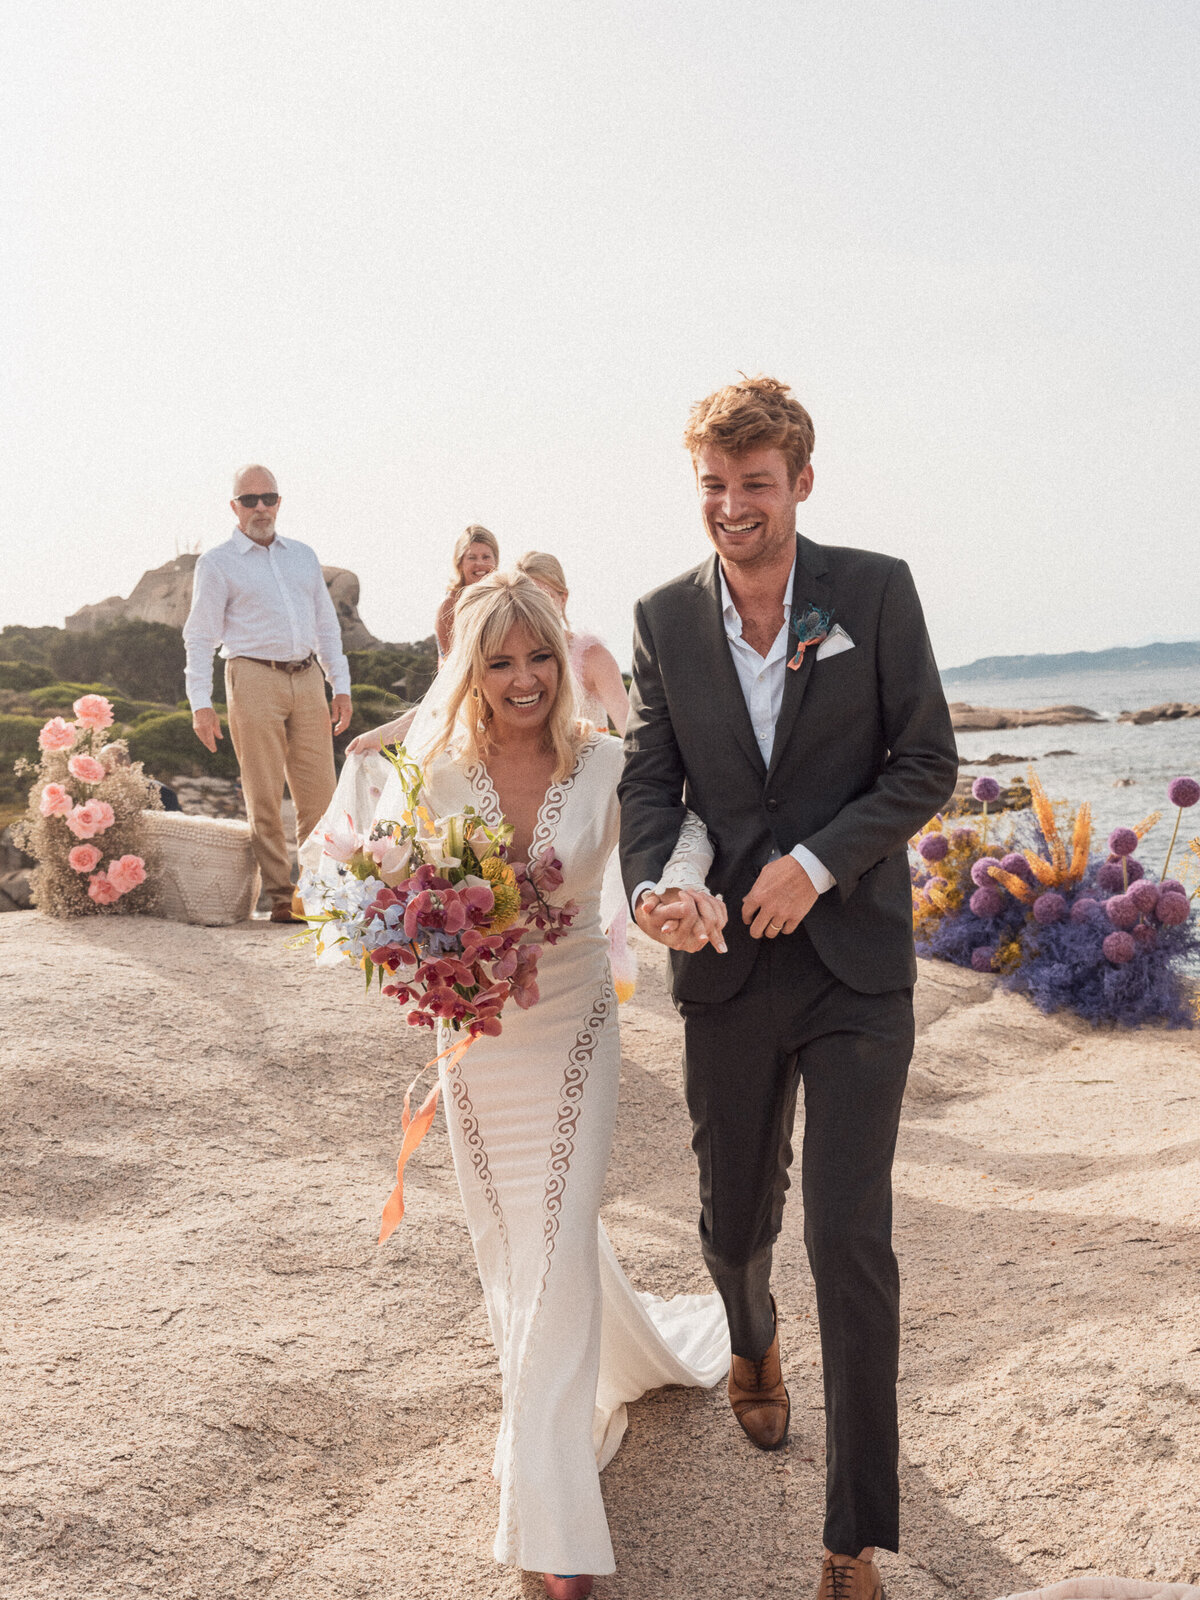 An extravagant and cool 70s-inspired wedding